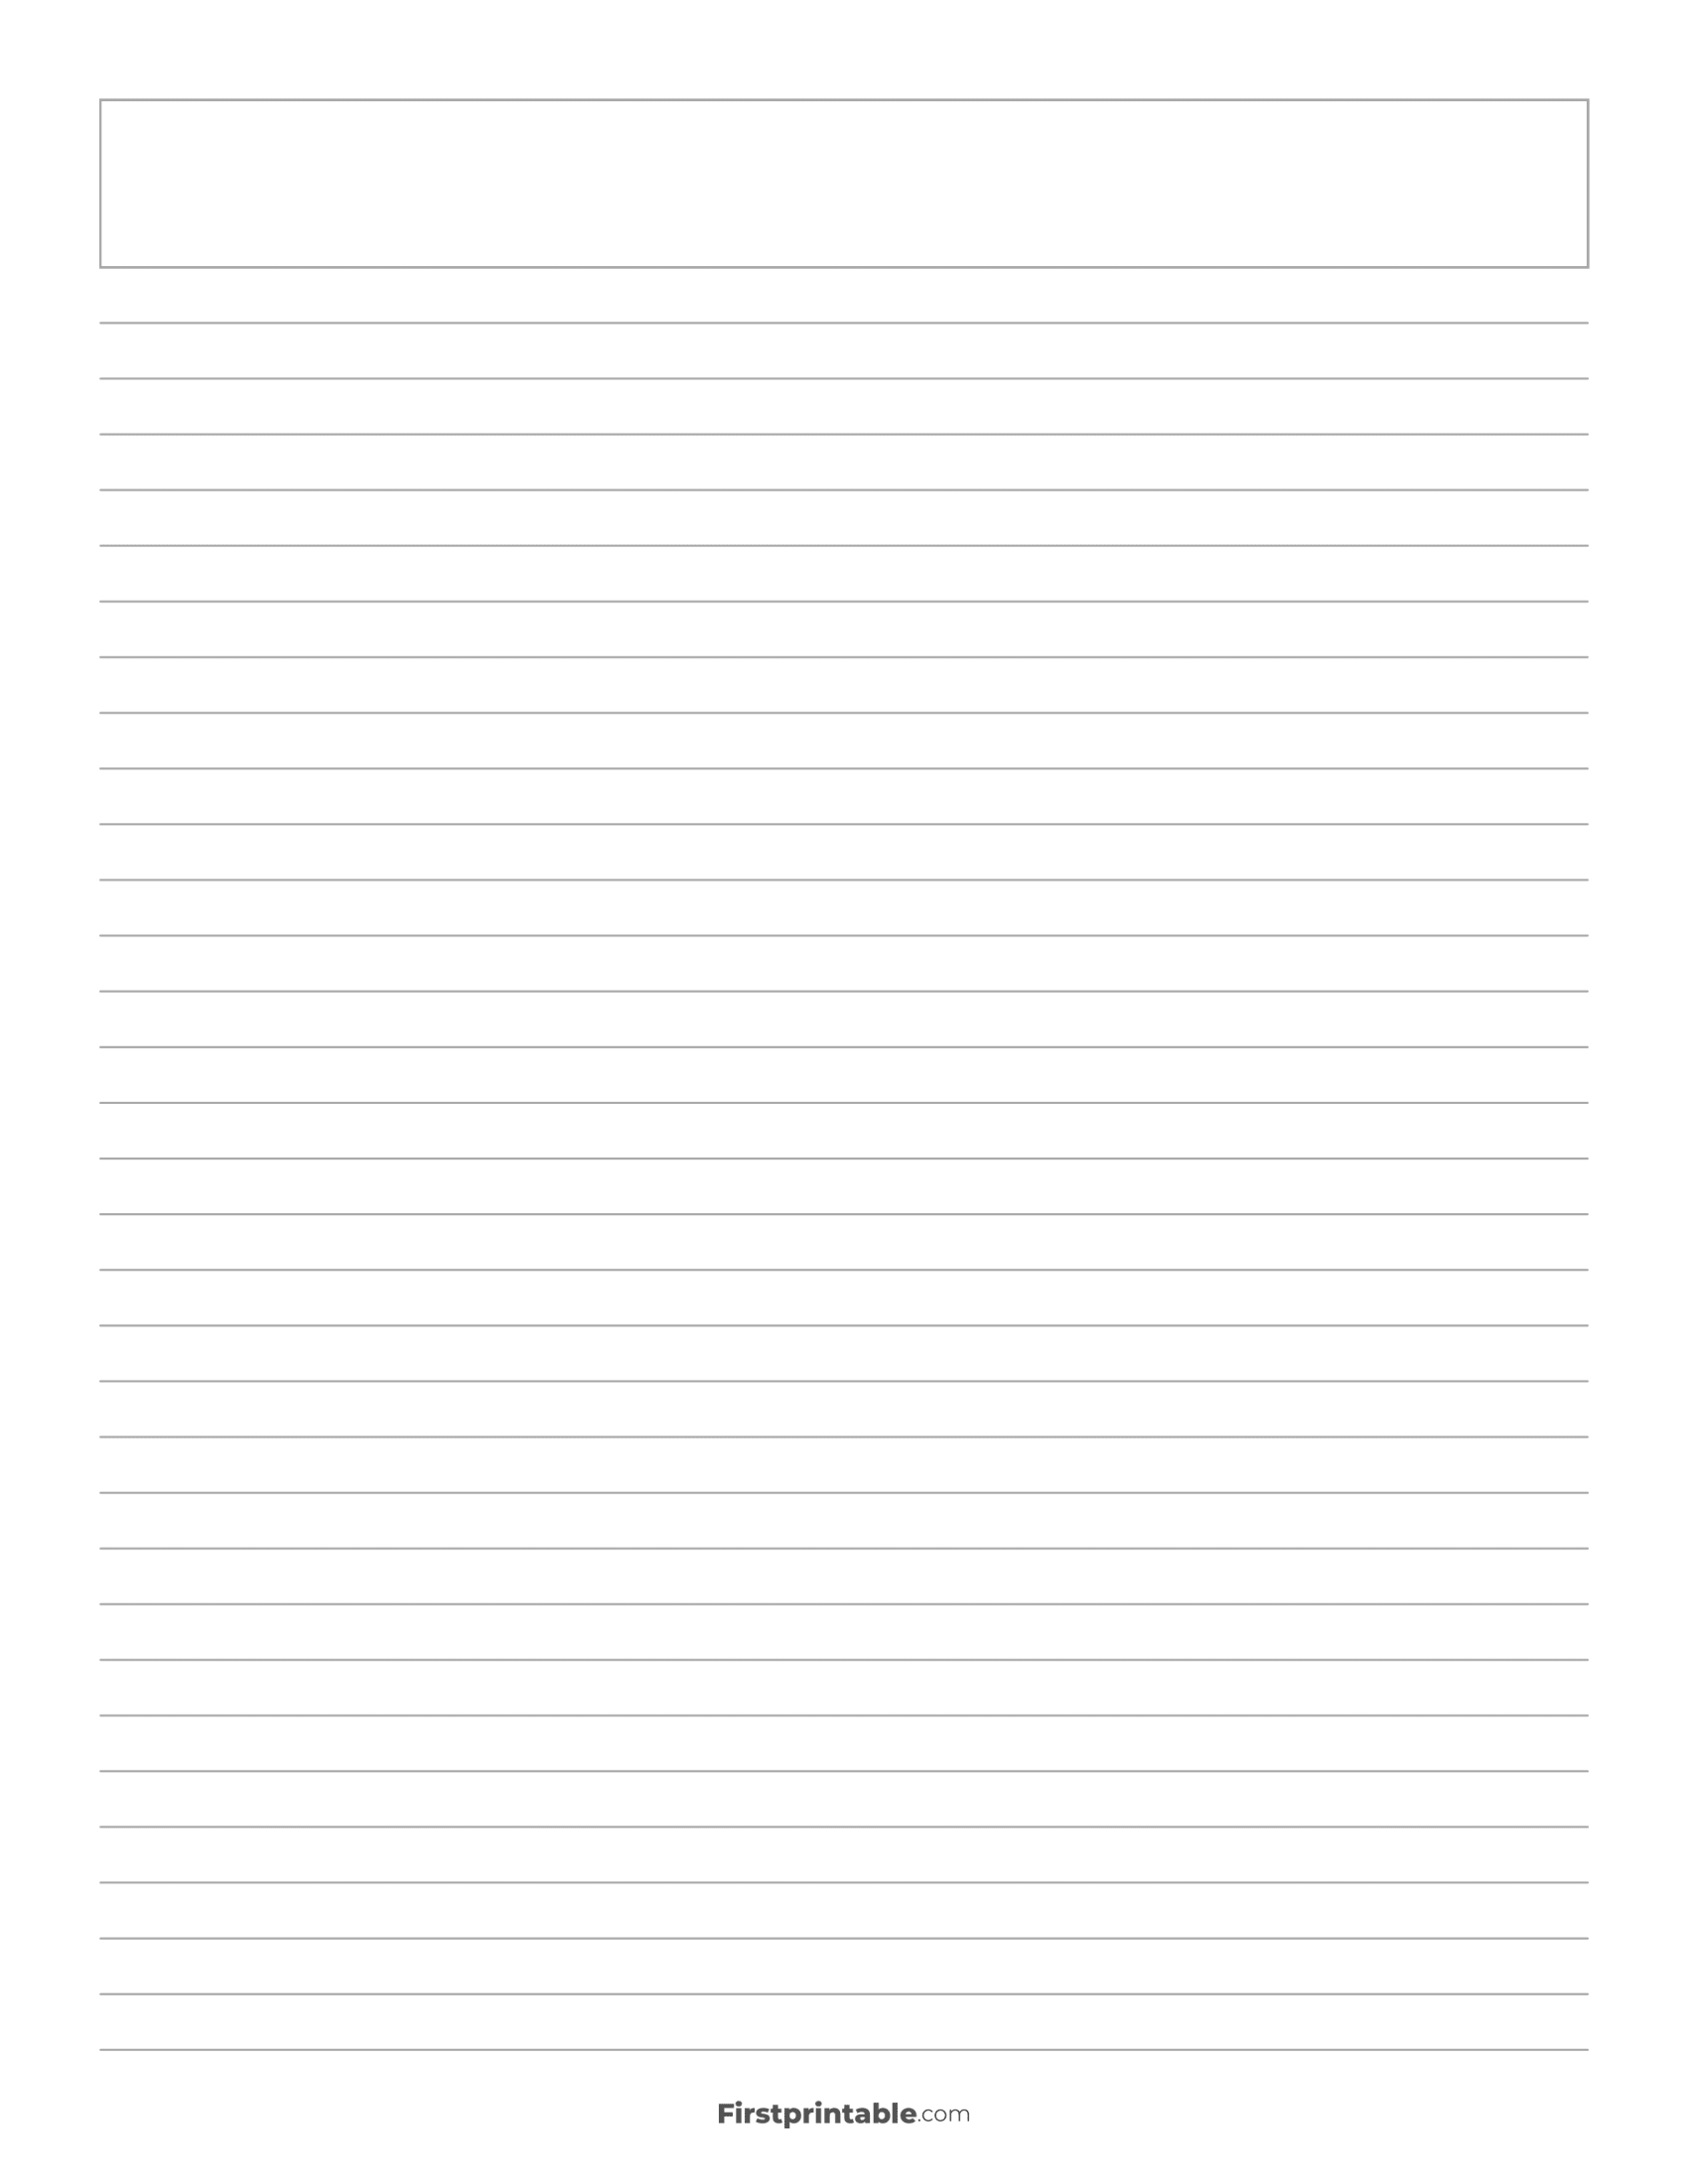 Printable Lined Paper Template - College Ruled with Title